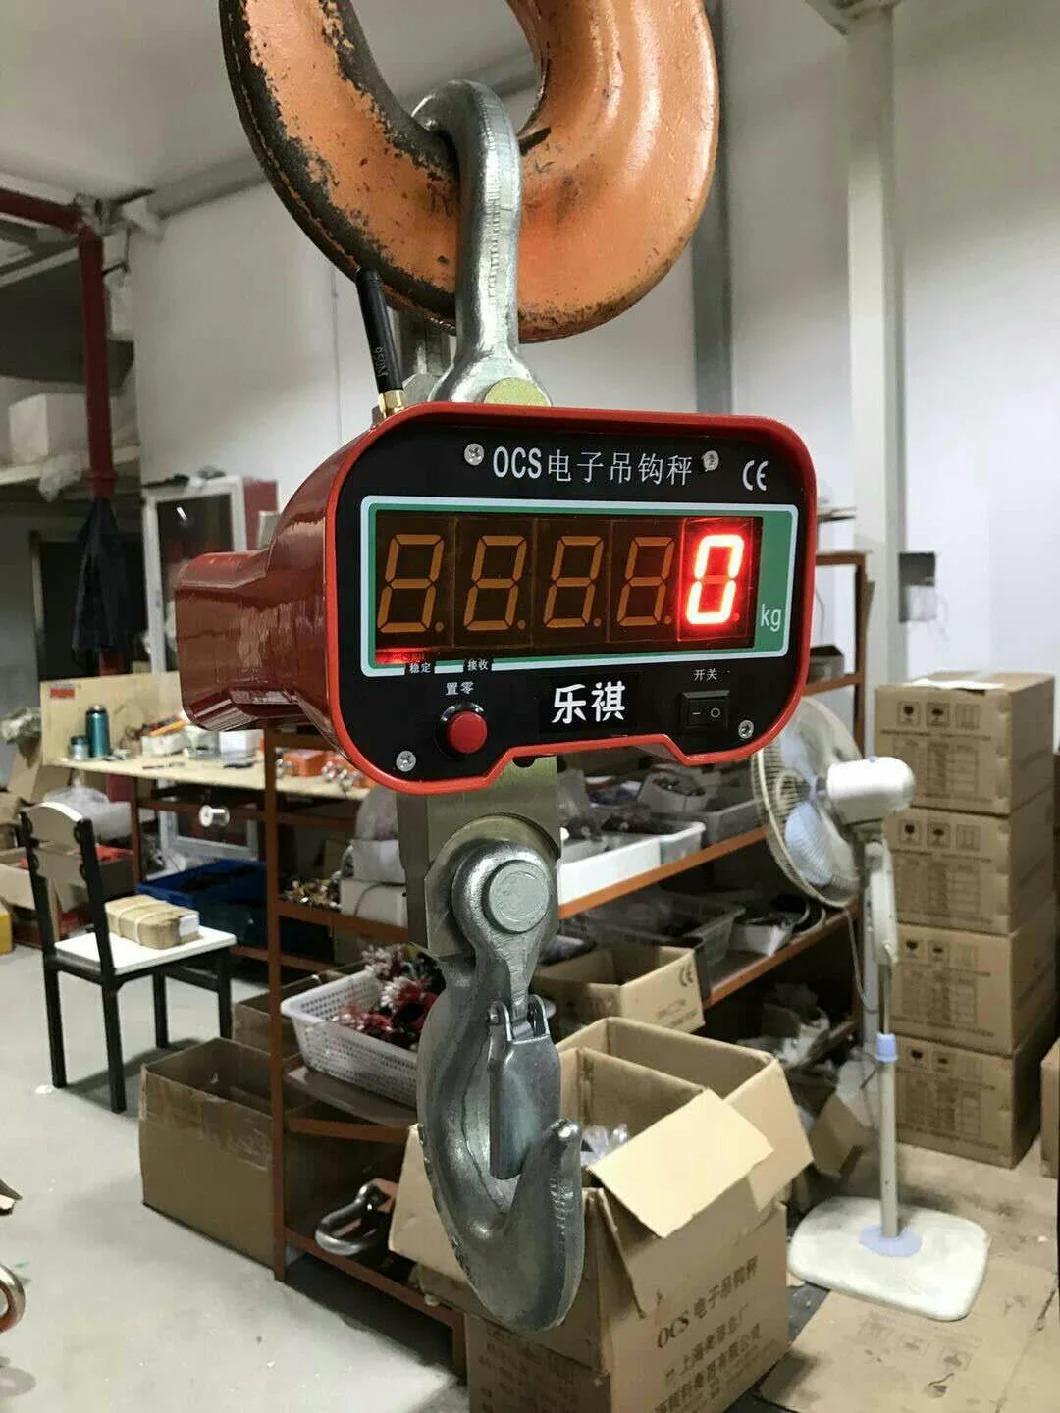 Ocs 2t 3t 5t Electronic Weighing Hoist Crane Scale